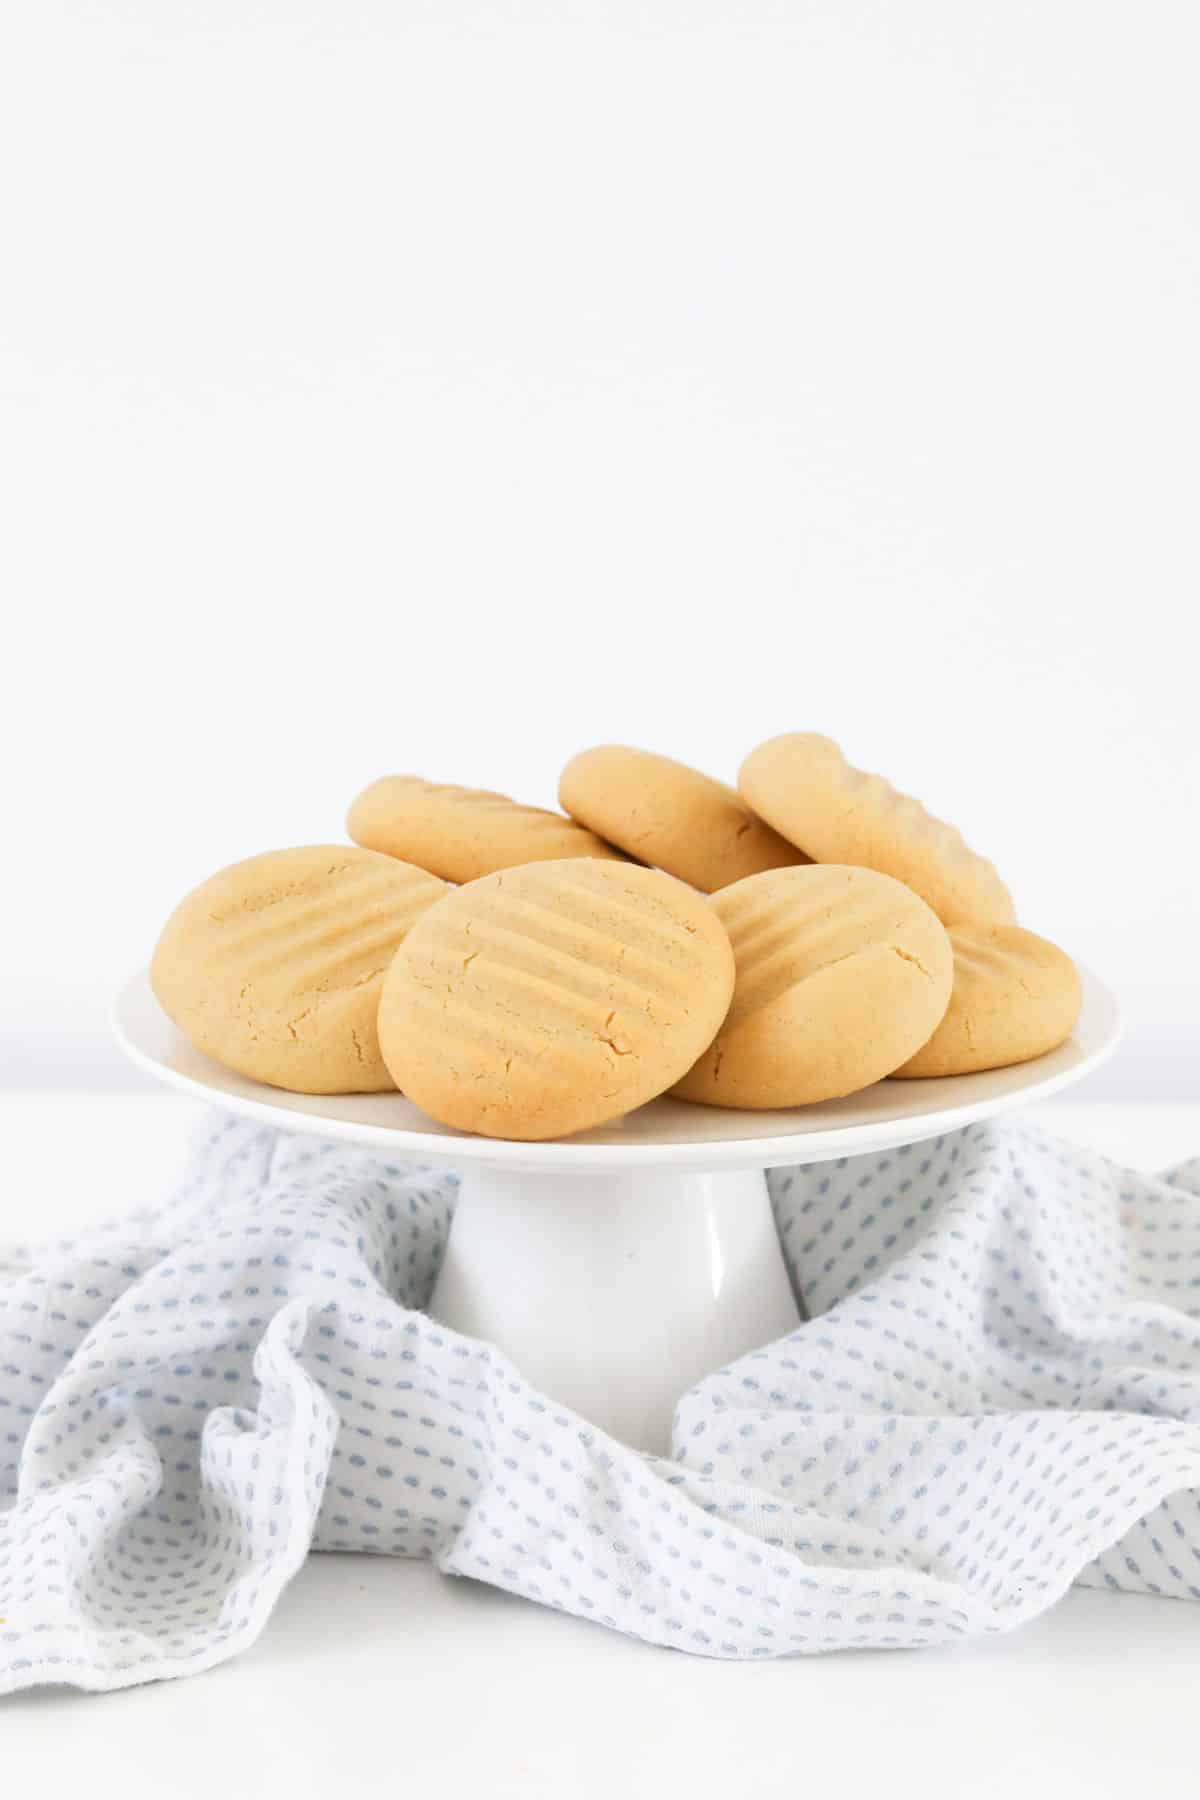 A white cake stand with a pile of Hokey Pokey biscuits served on it